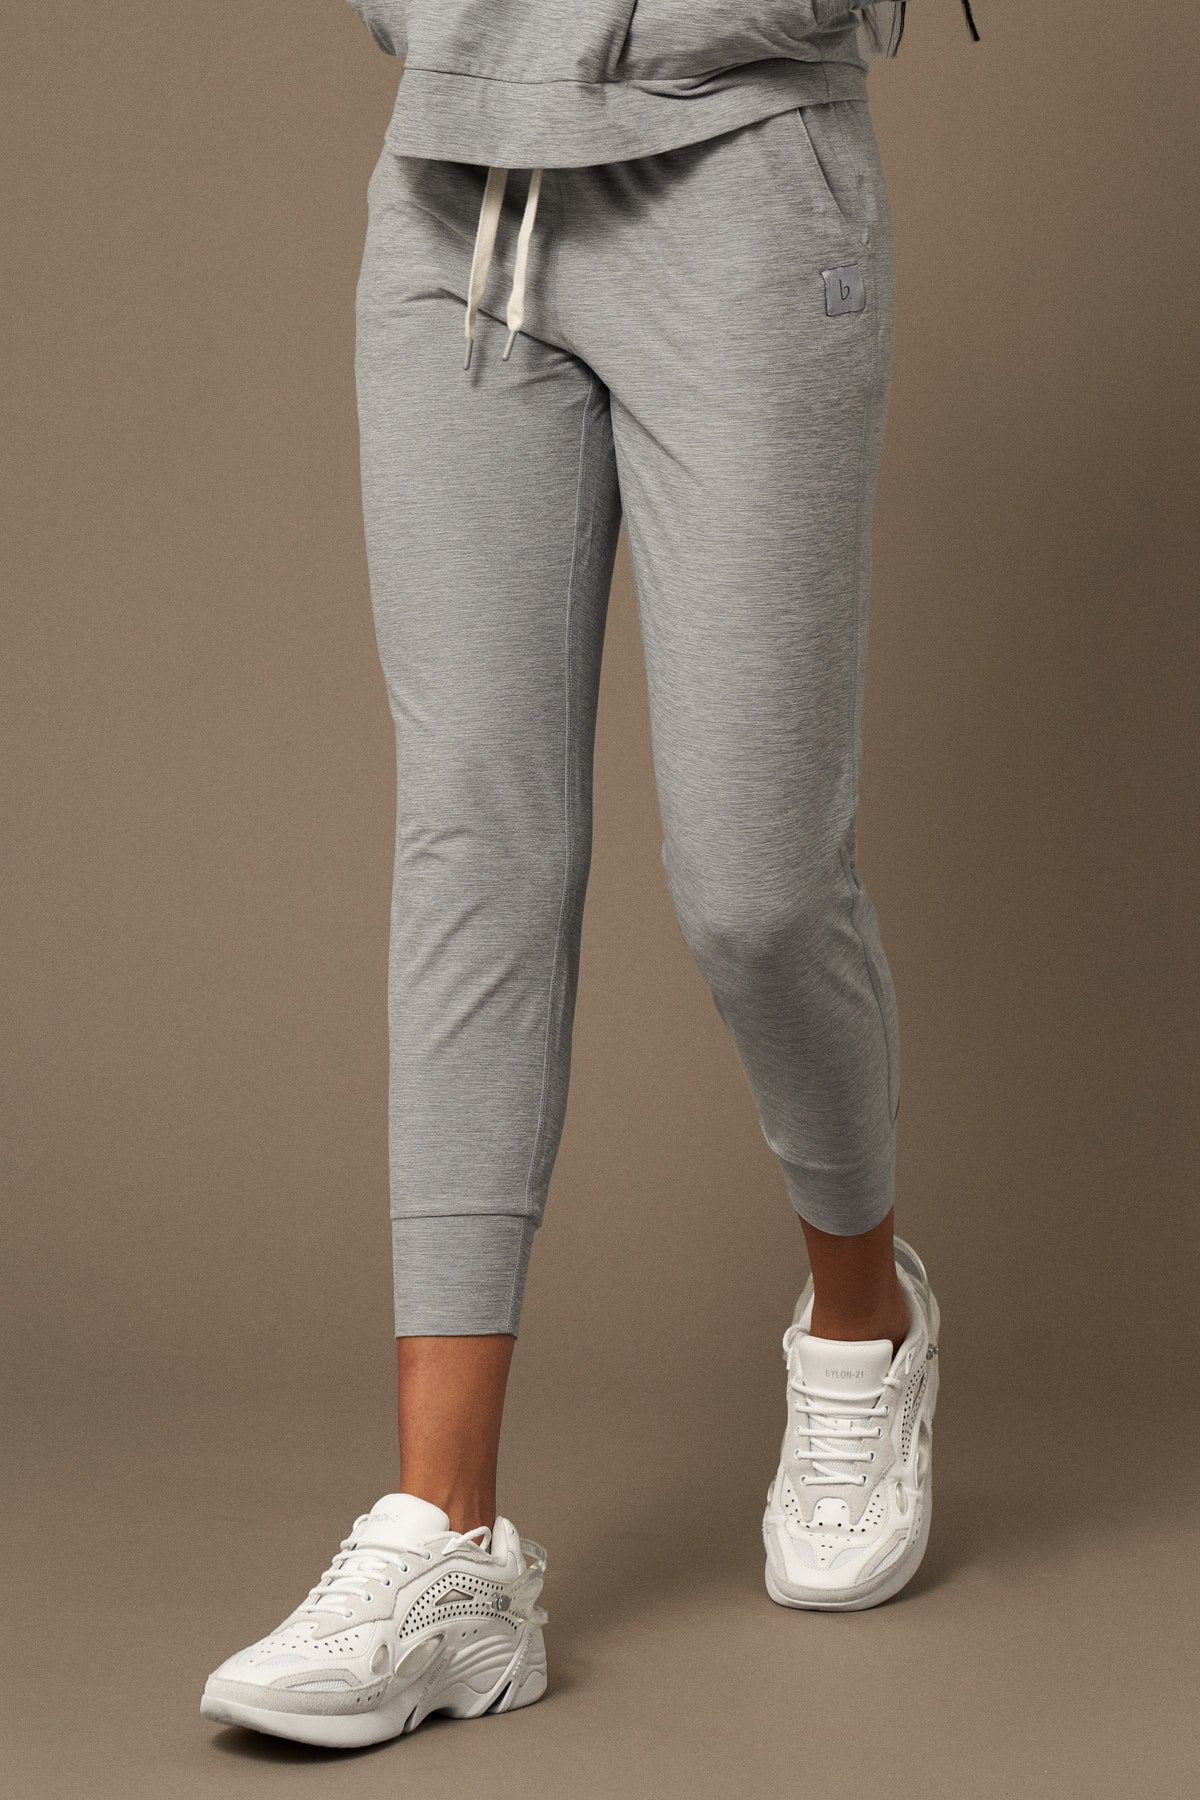 Lounge Jogger in Grey Melange-Joggers-Shop Sustainable Recycled Yoga Leggings Women's Clothing On-line Barcelona Believe Athletics Sustainable Recycled Yoga Clothes